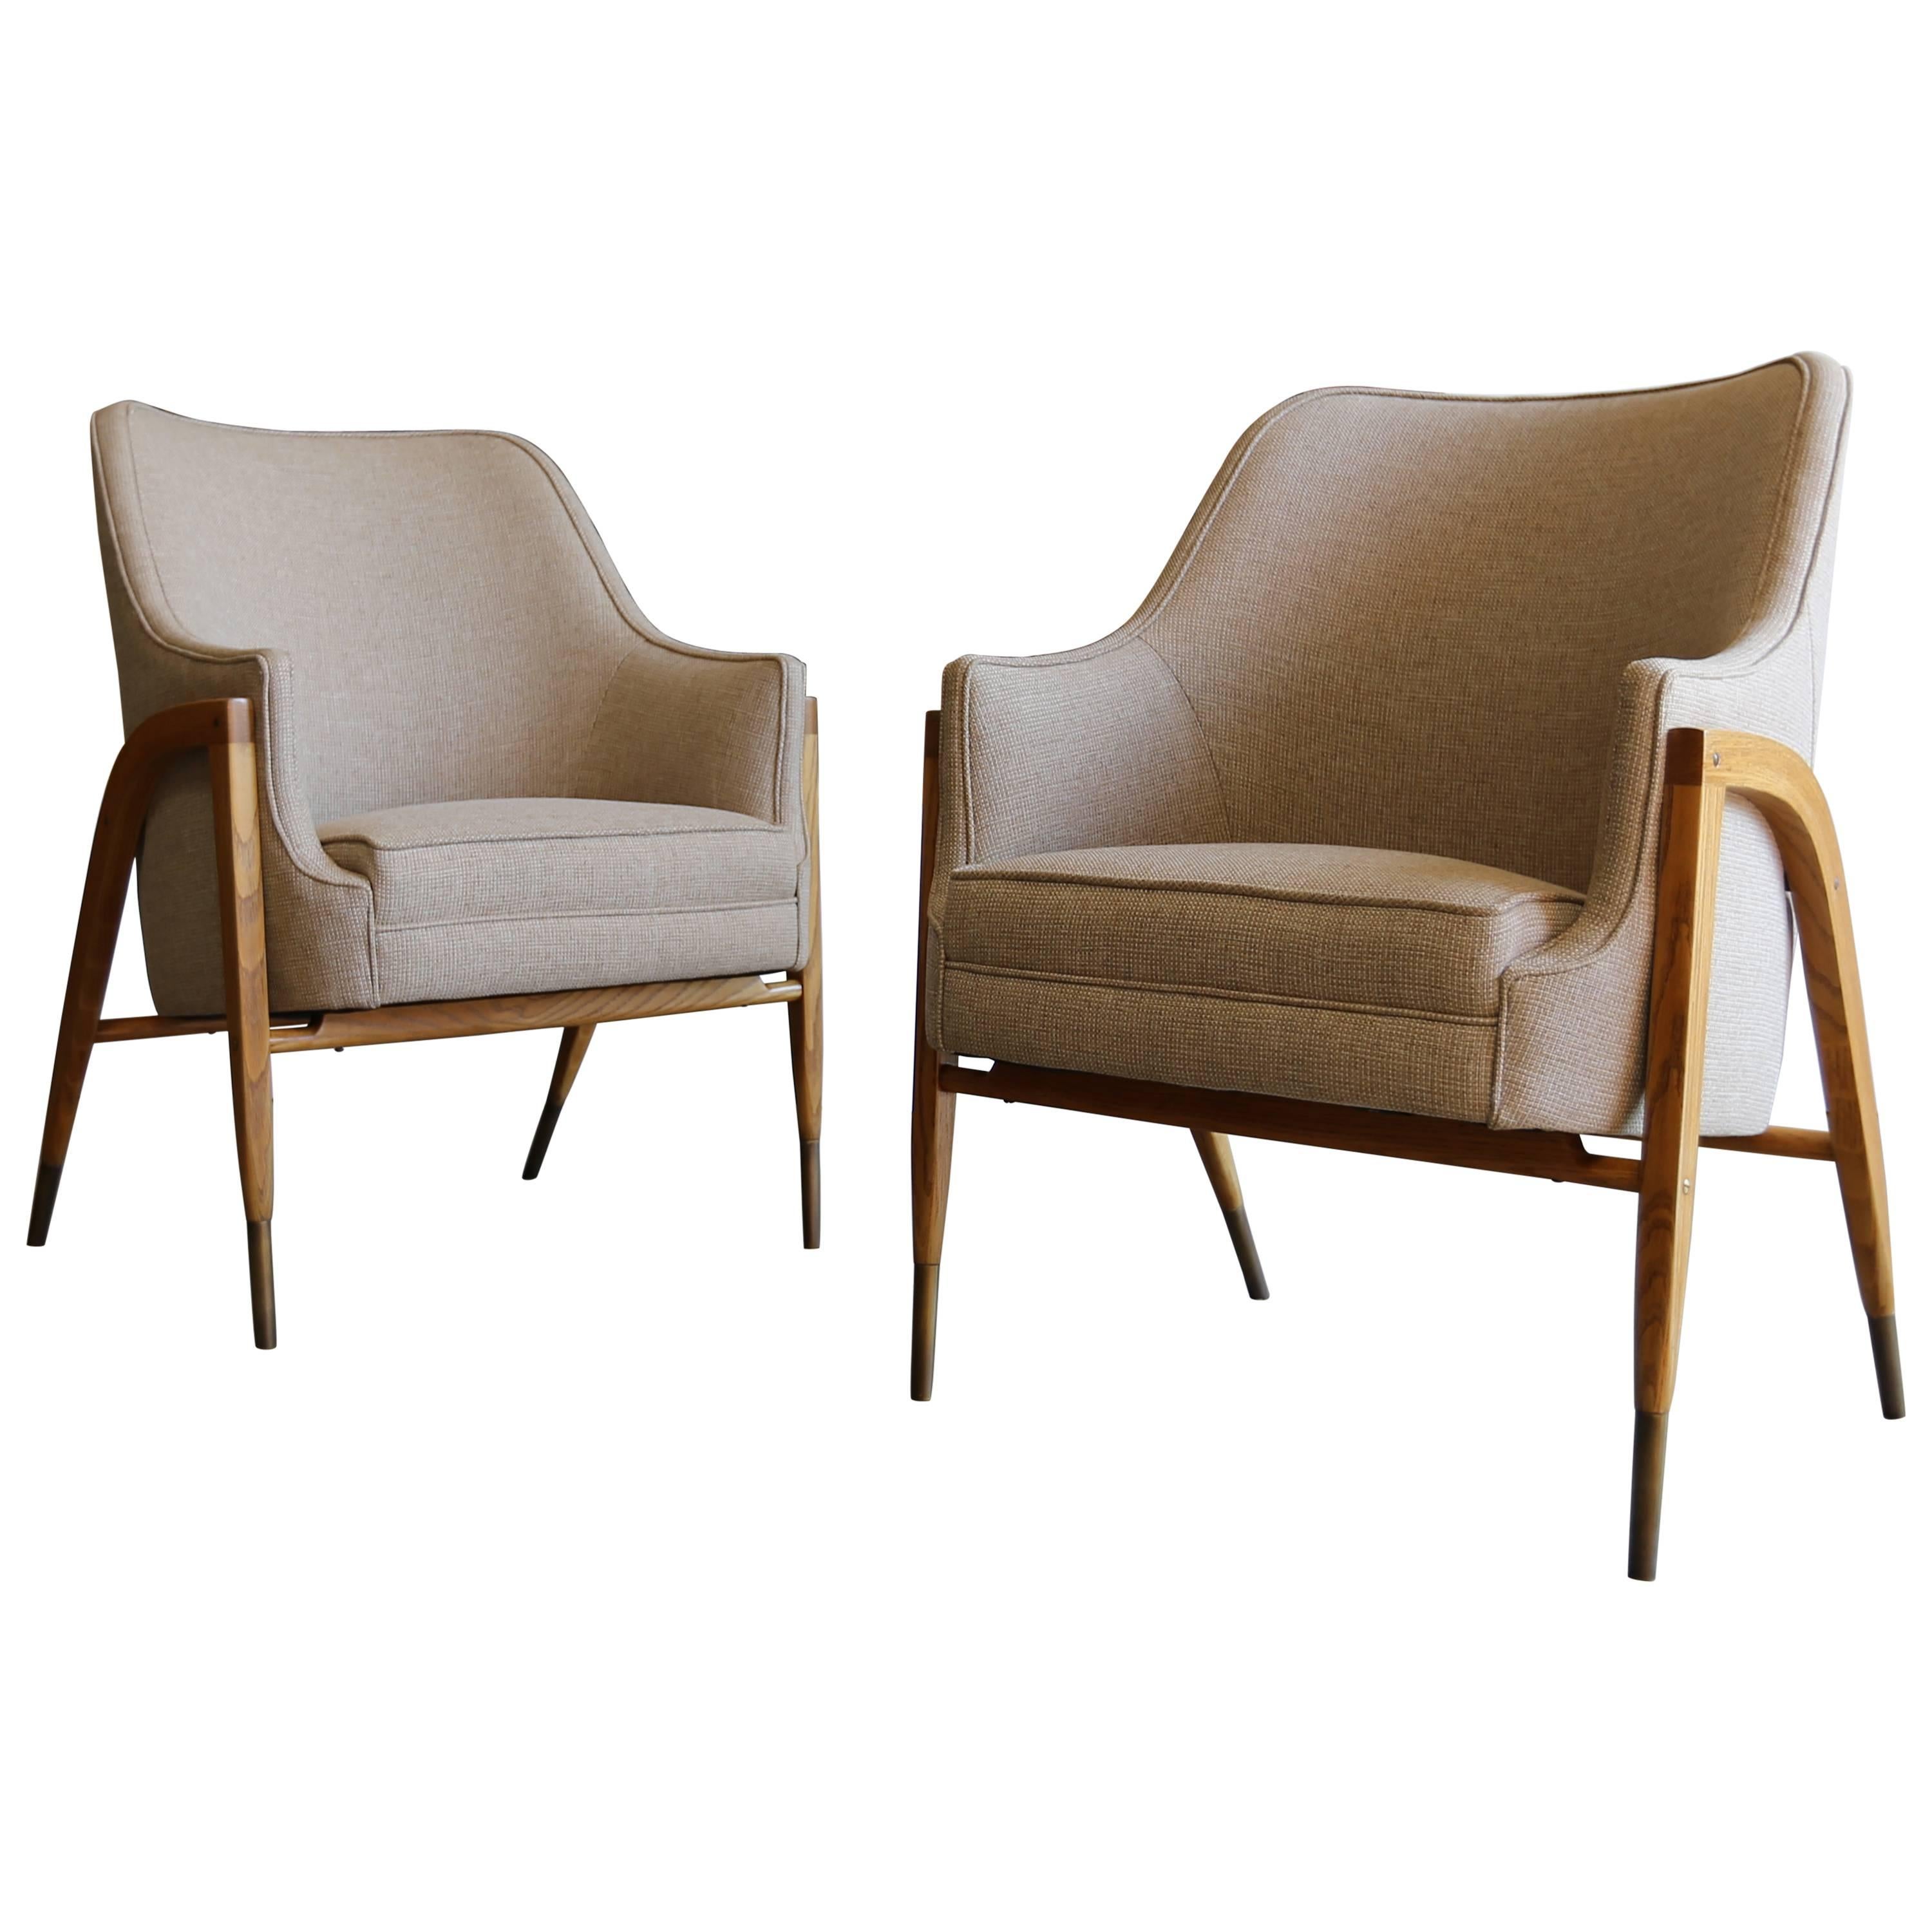 Rare Pair of Model # 5510 Armchairs by Edward Wormley for Dunbar